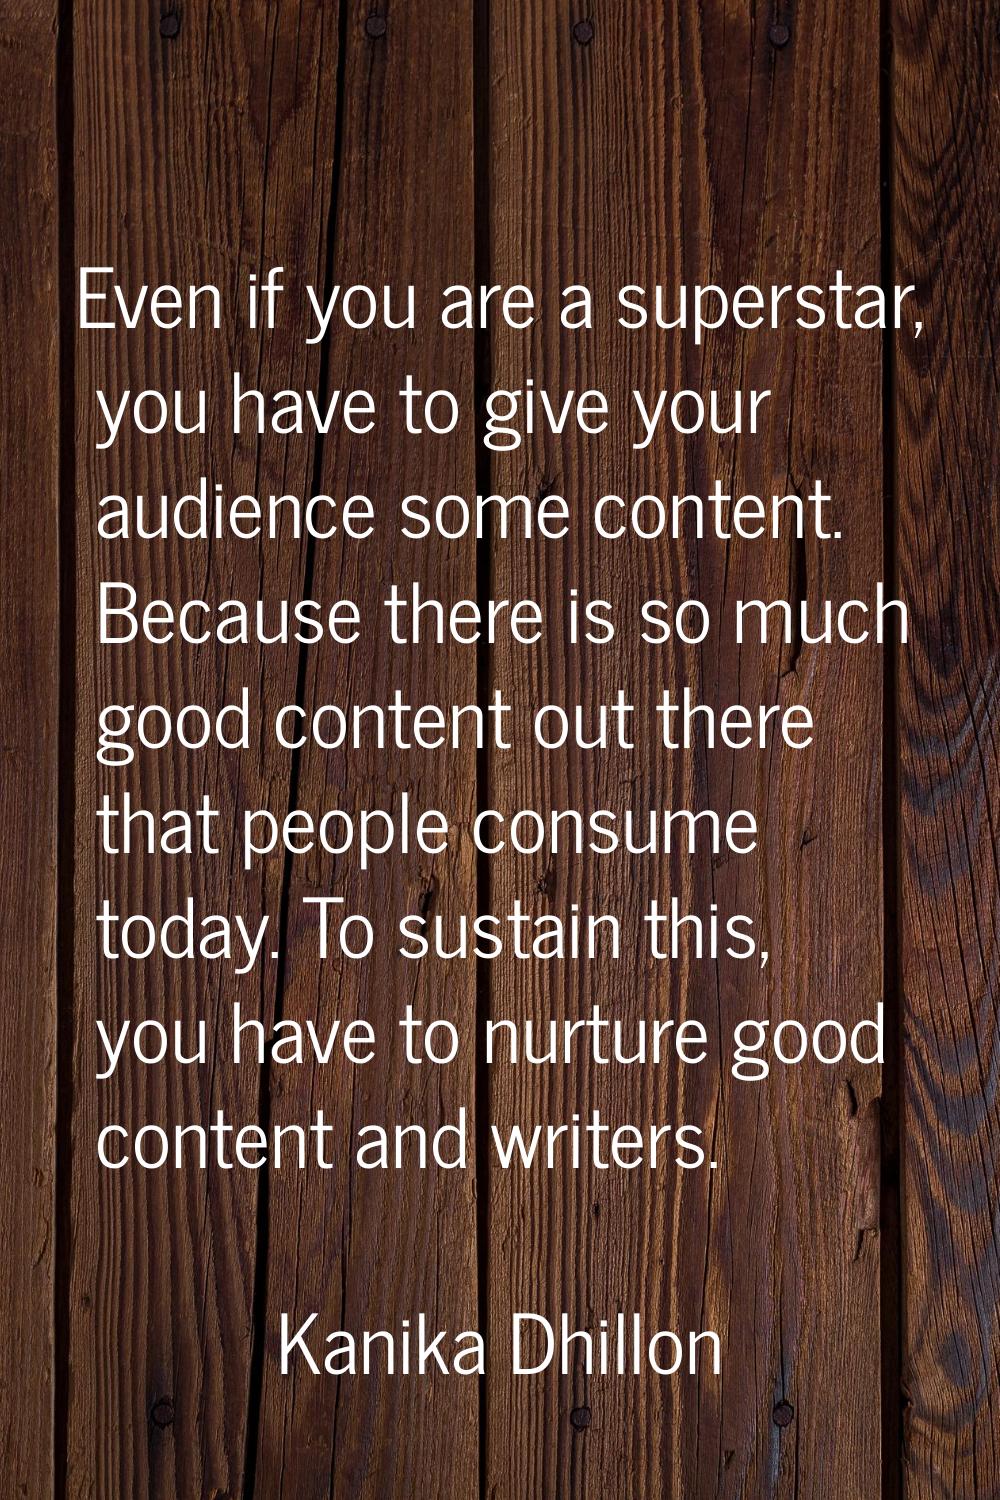 Even if you are a superstar, you have to give your audience some content. Because there is so much 